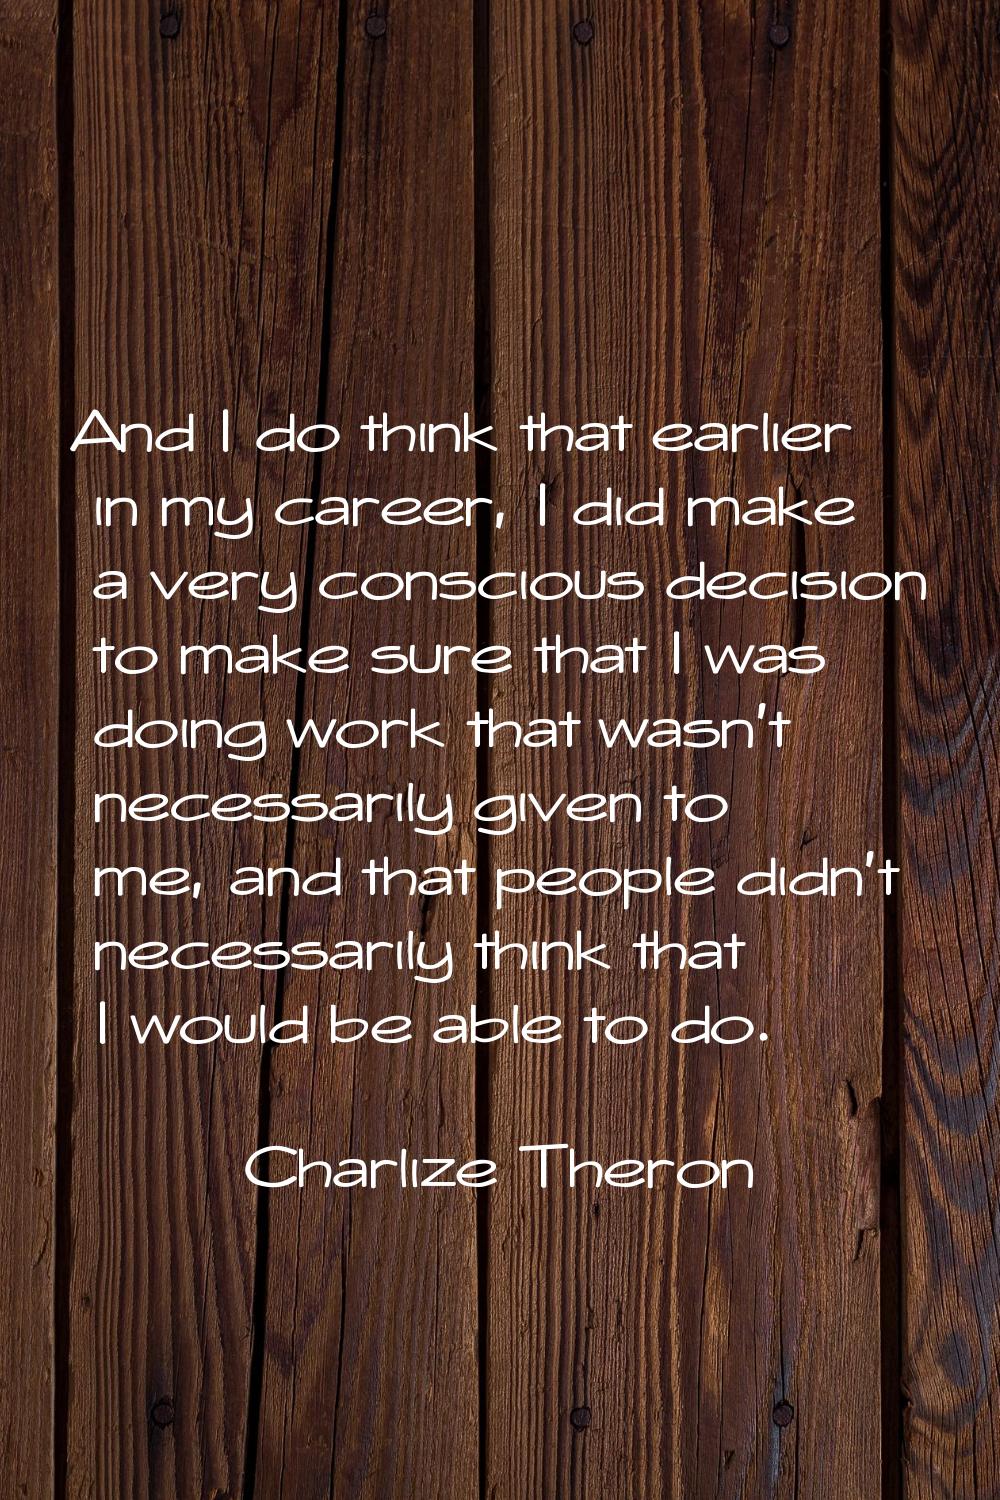 And I do think that earlier in my career, I did make a very conscious decision to make sure that I 